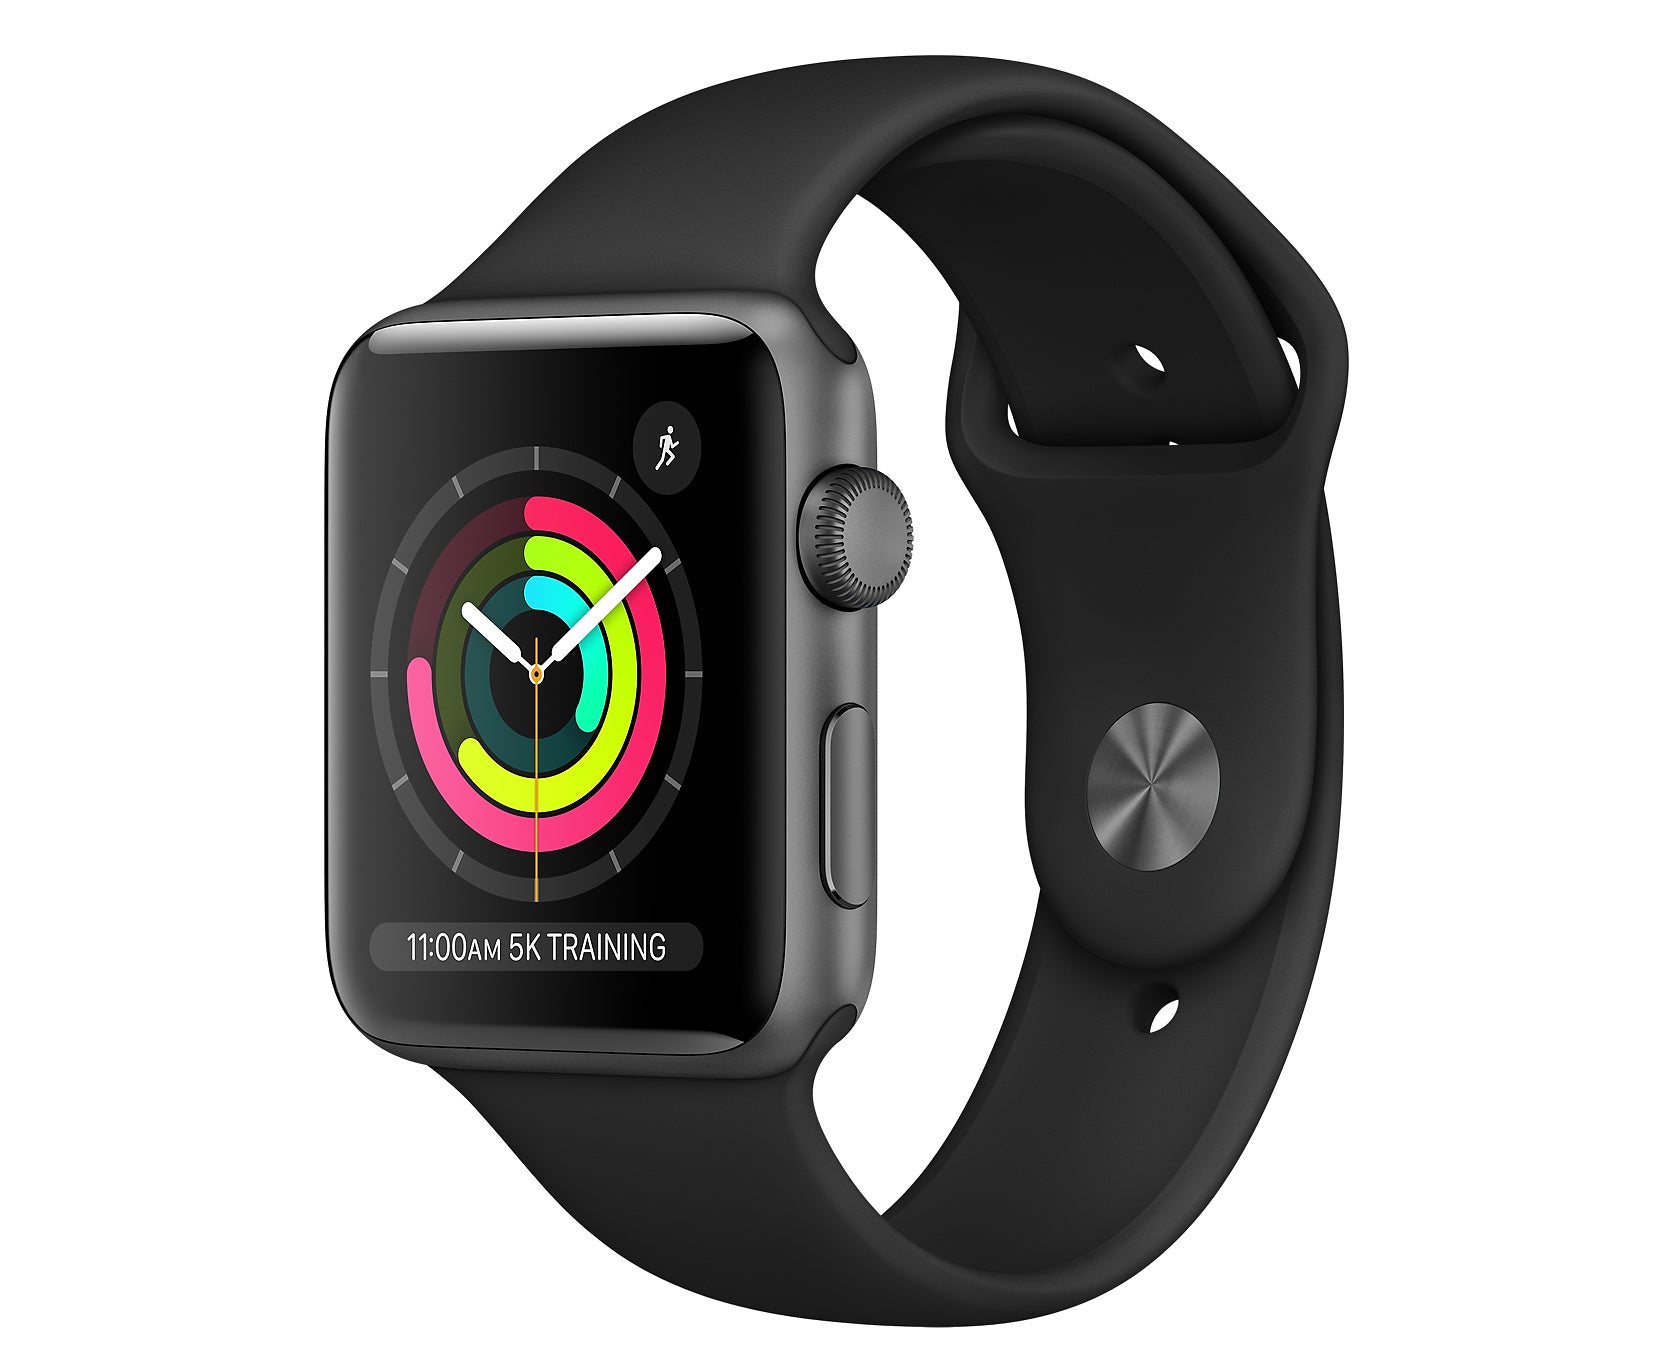 Apple Watch Series 3 Technical Specifications